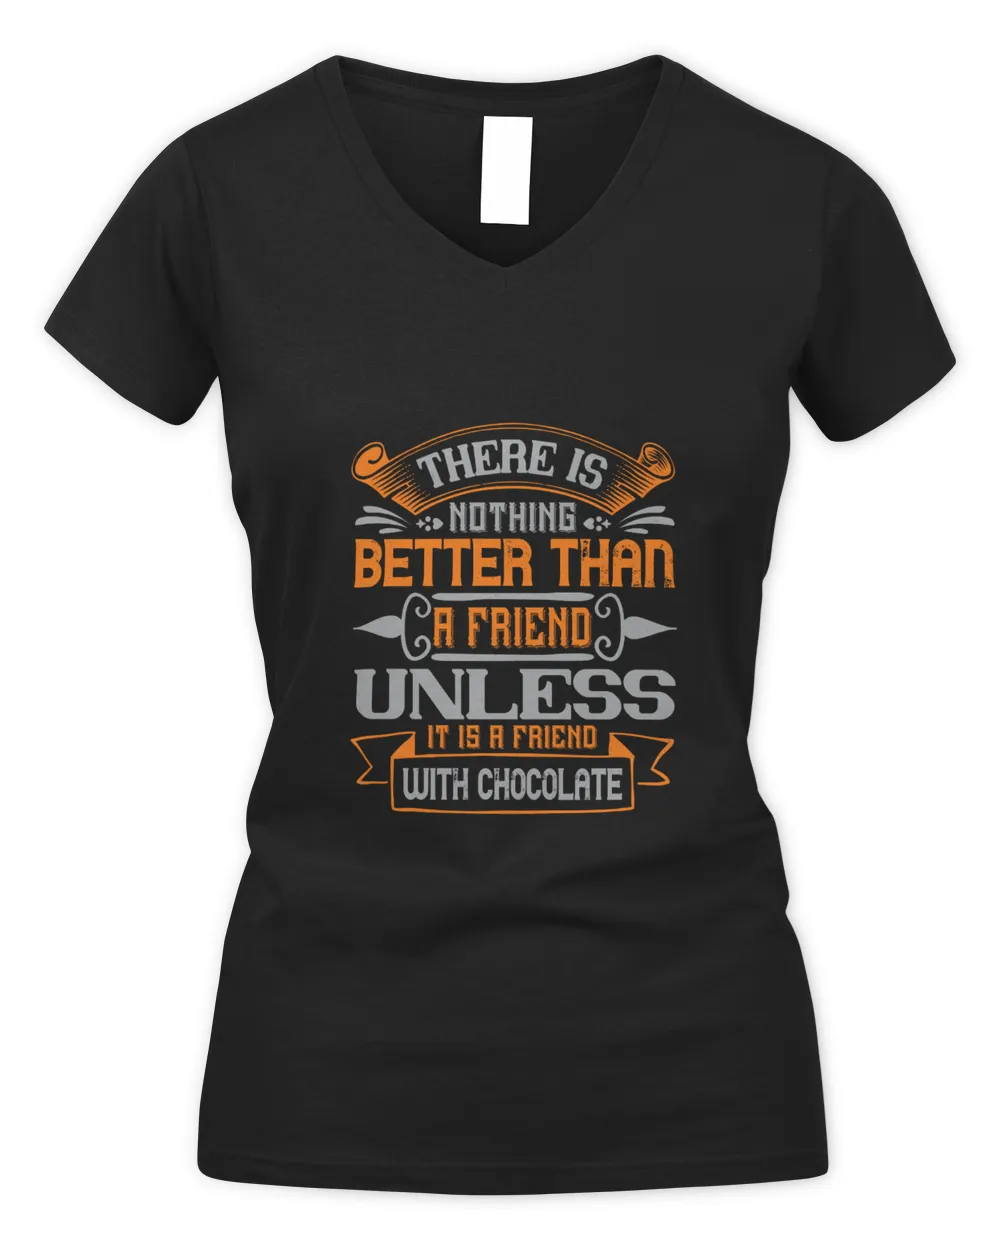 There Is Nothing Better Than A Friend, Unless It Is A Friend With ChocolateBestie Shirt, Best Friend Shirt, Friendship Gift, Best Friend Birthday Gift, Friendship